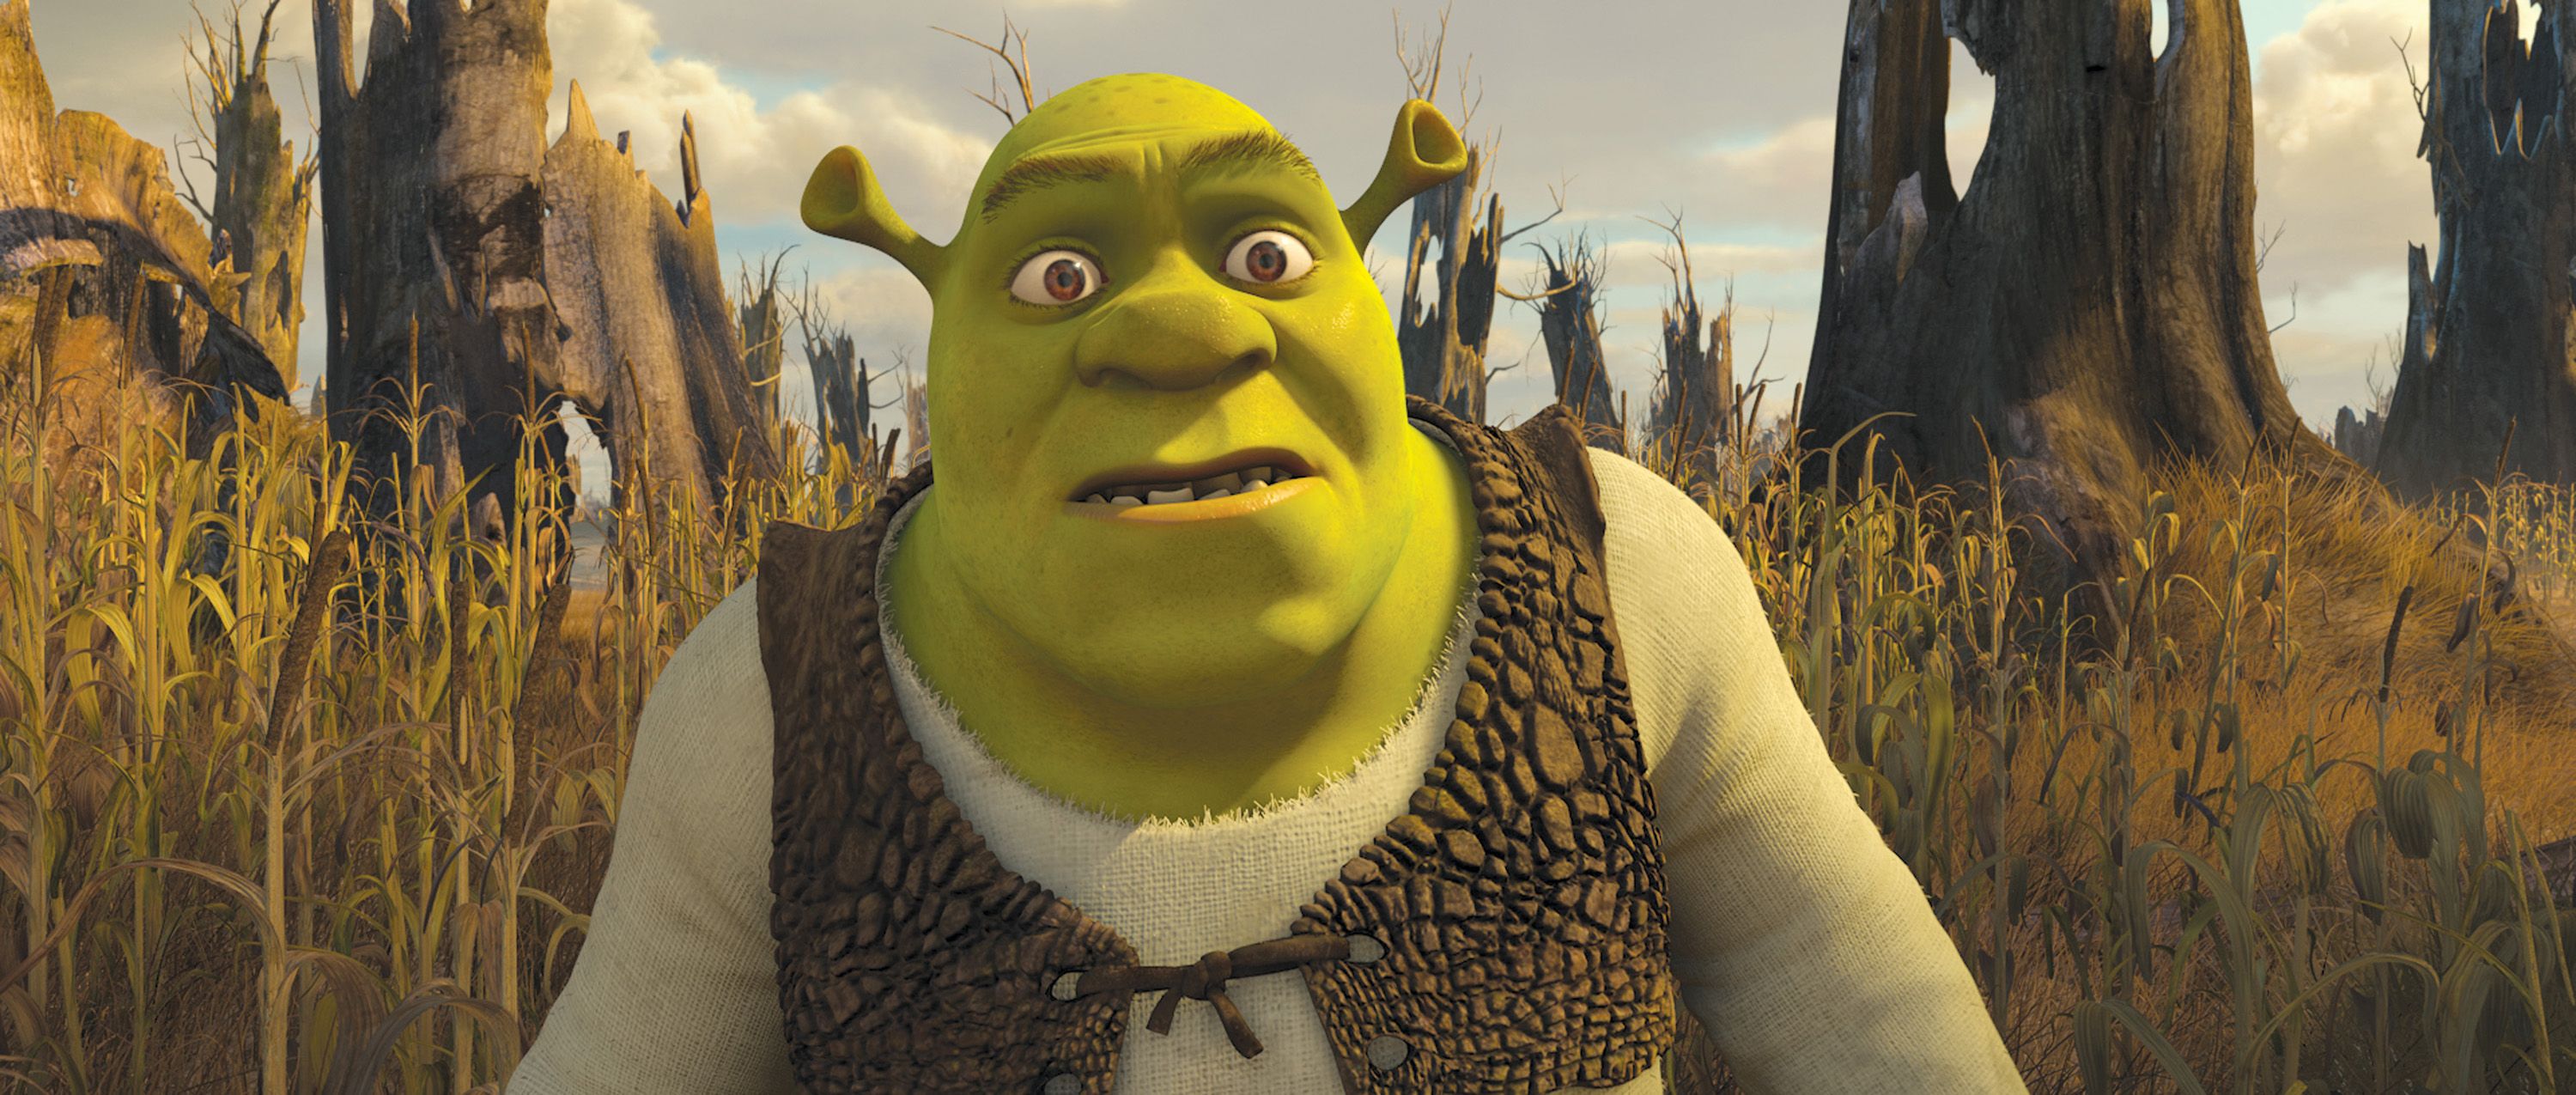 Mike Myers in Shrek Forever After